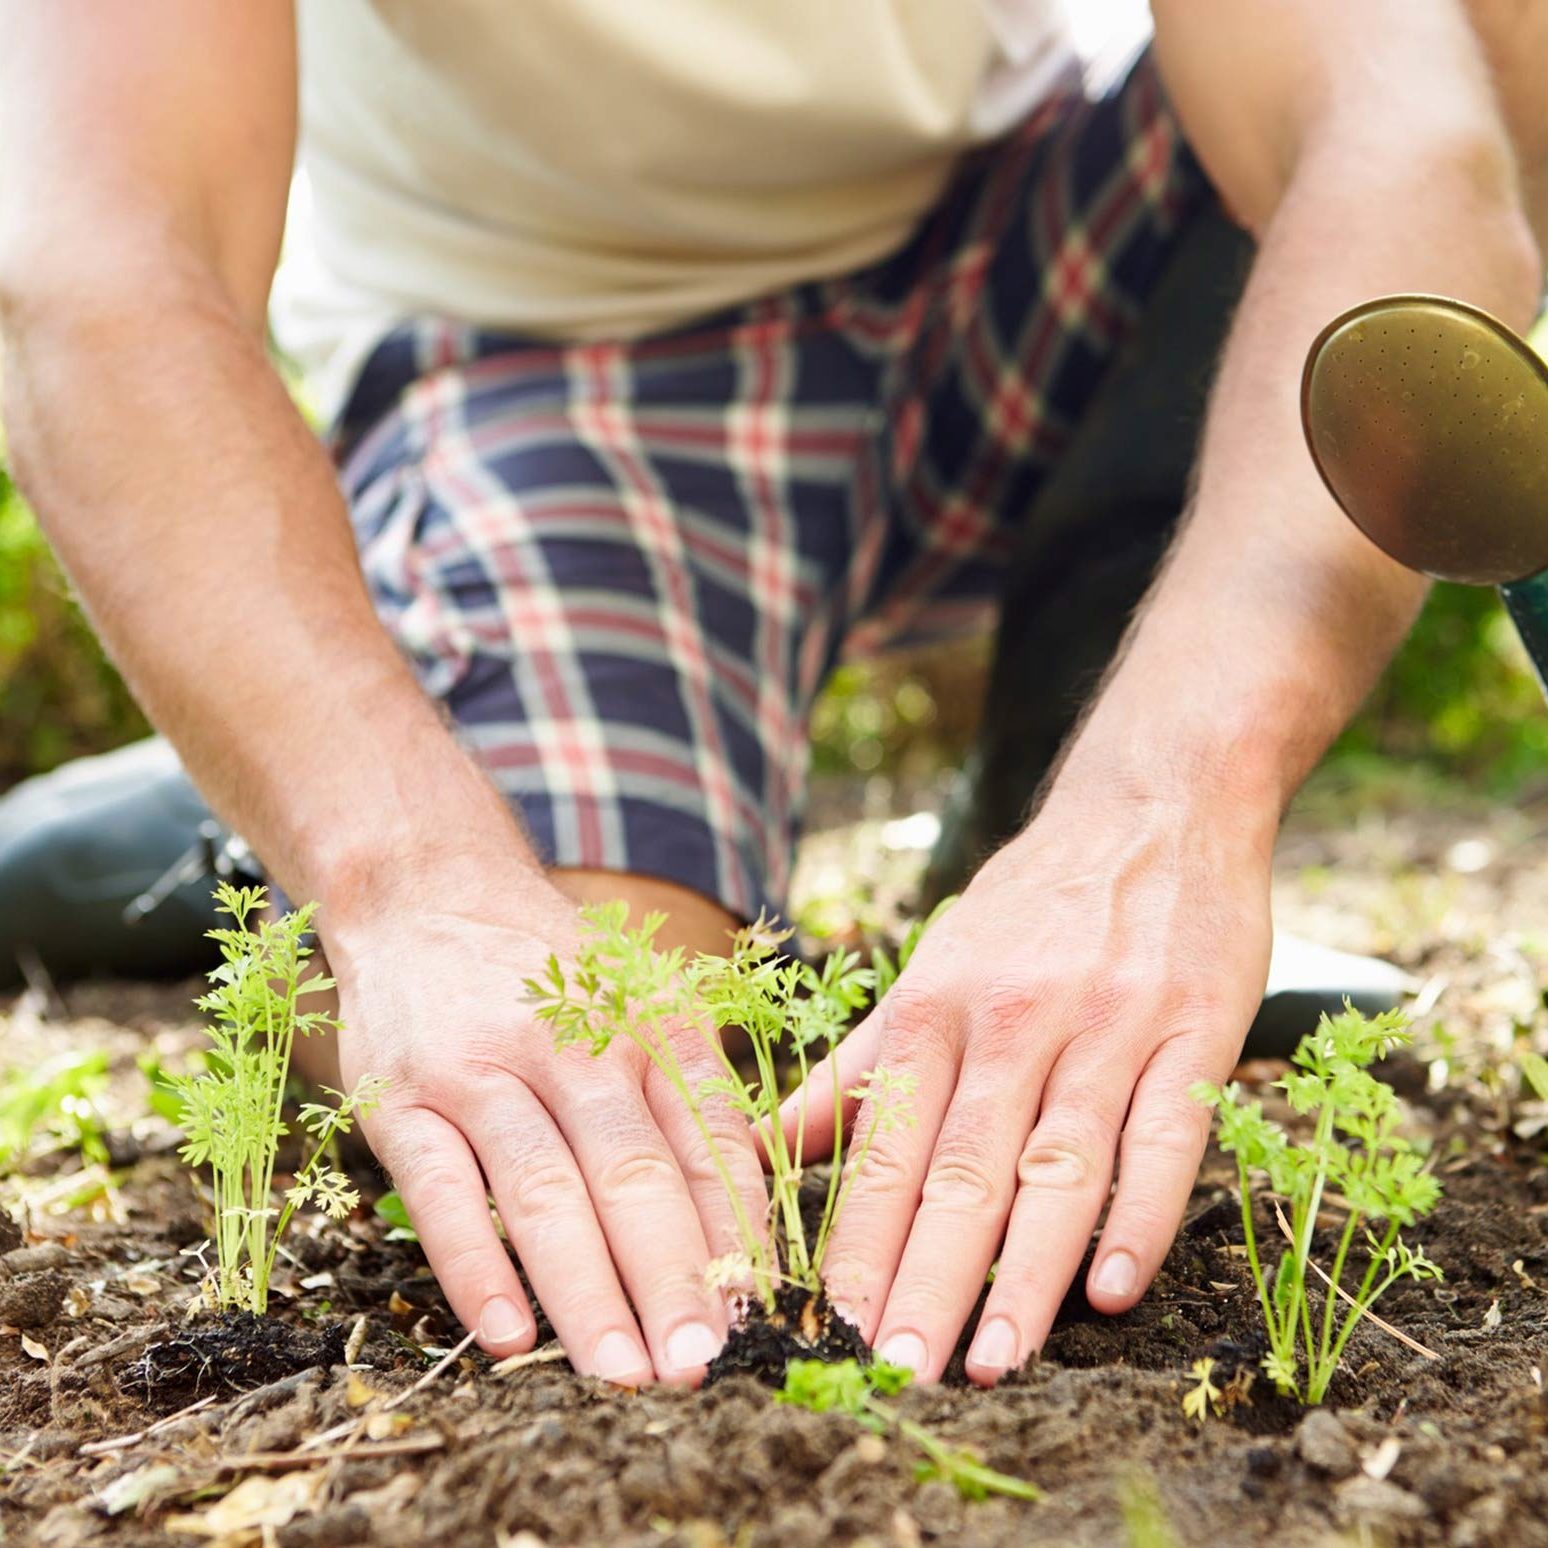 10 Surprising Ways Gardening Is One of the Healthiest Things You Can Do